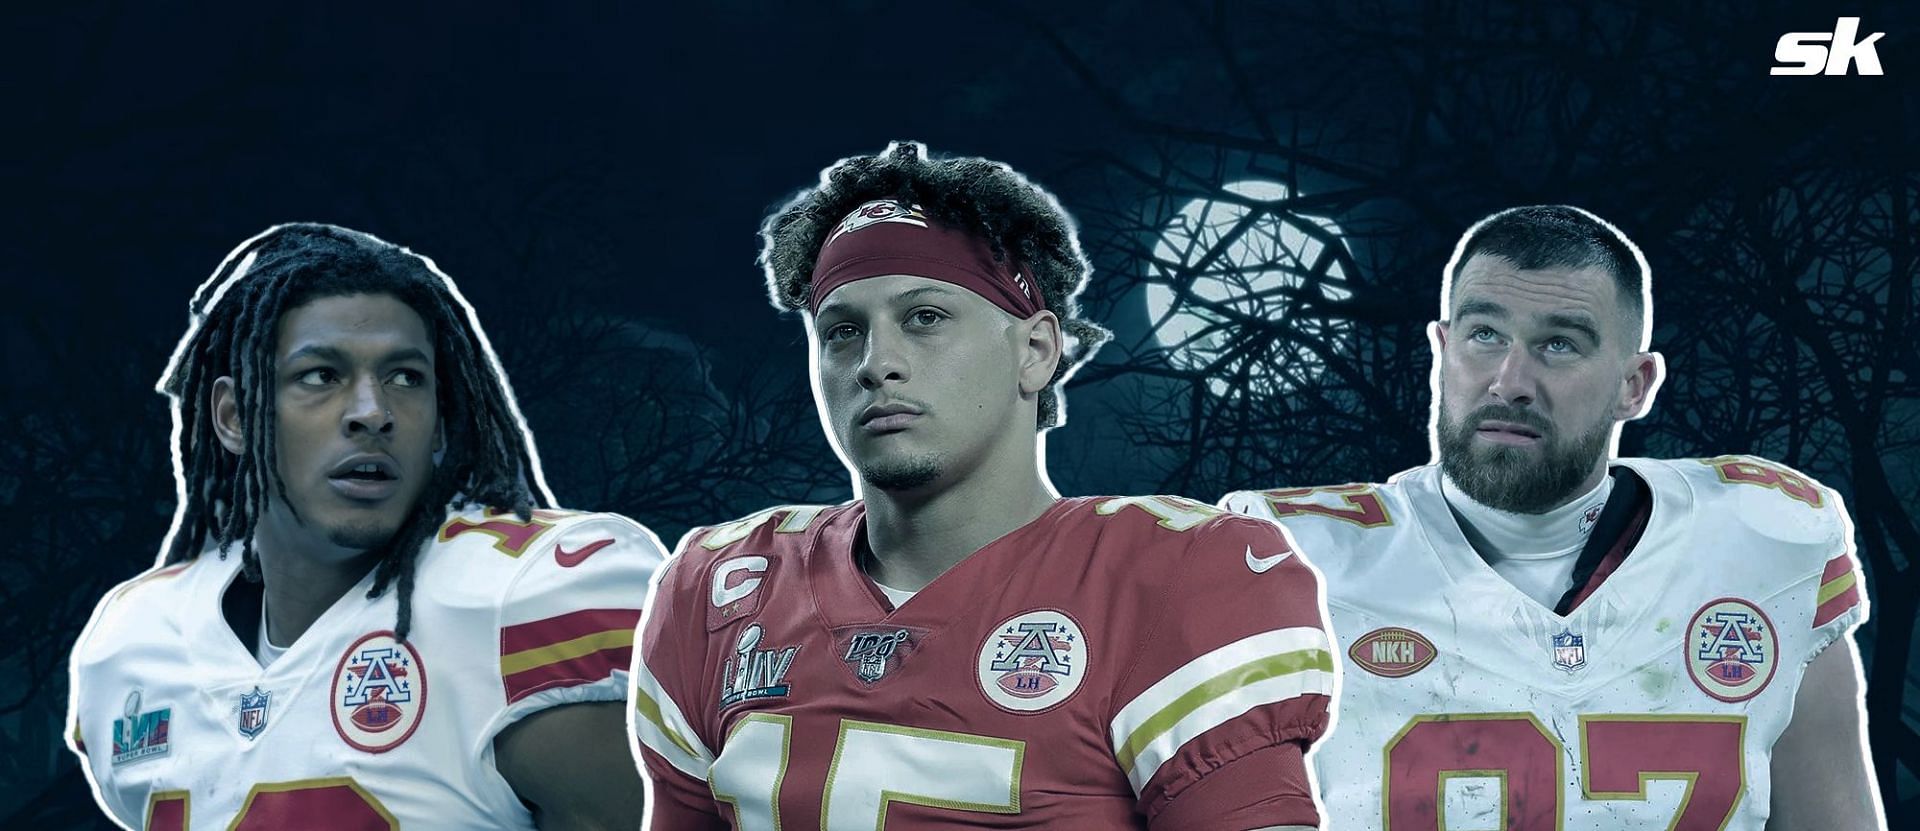 Chiefs offense led by Patrick Mahomes &lsquo;looks broken and boring&rsquo;, claims Kevin Wildes